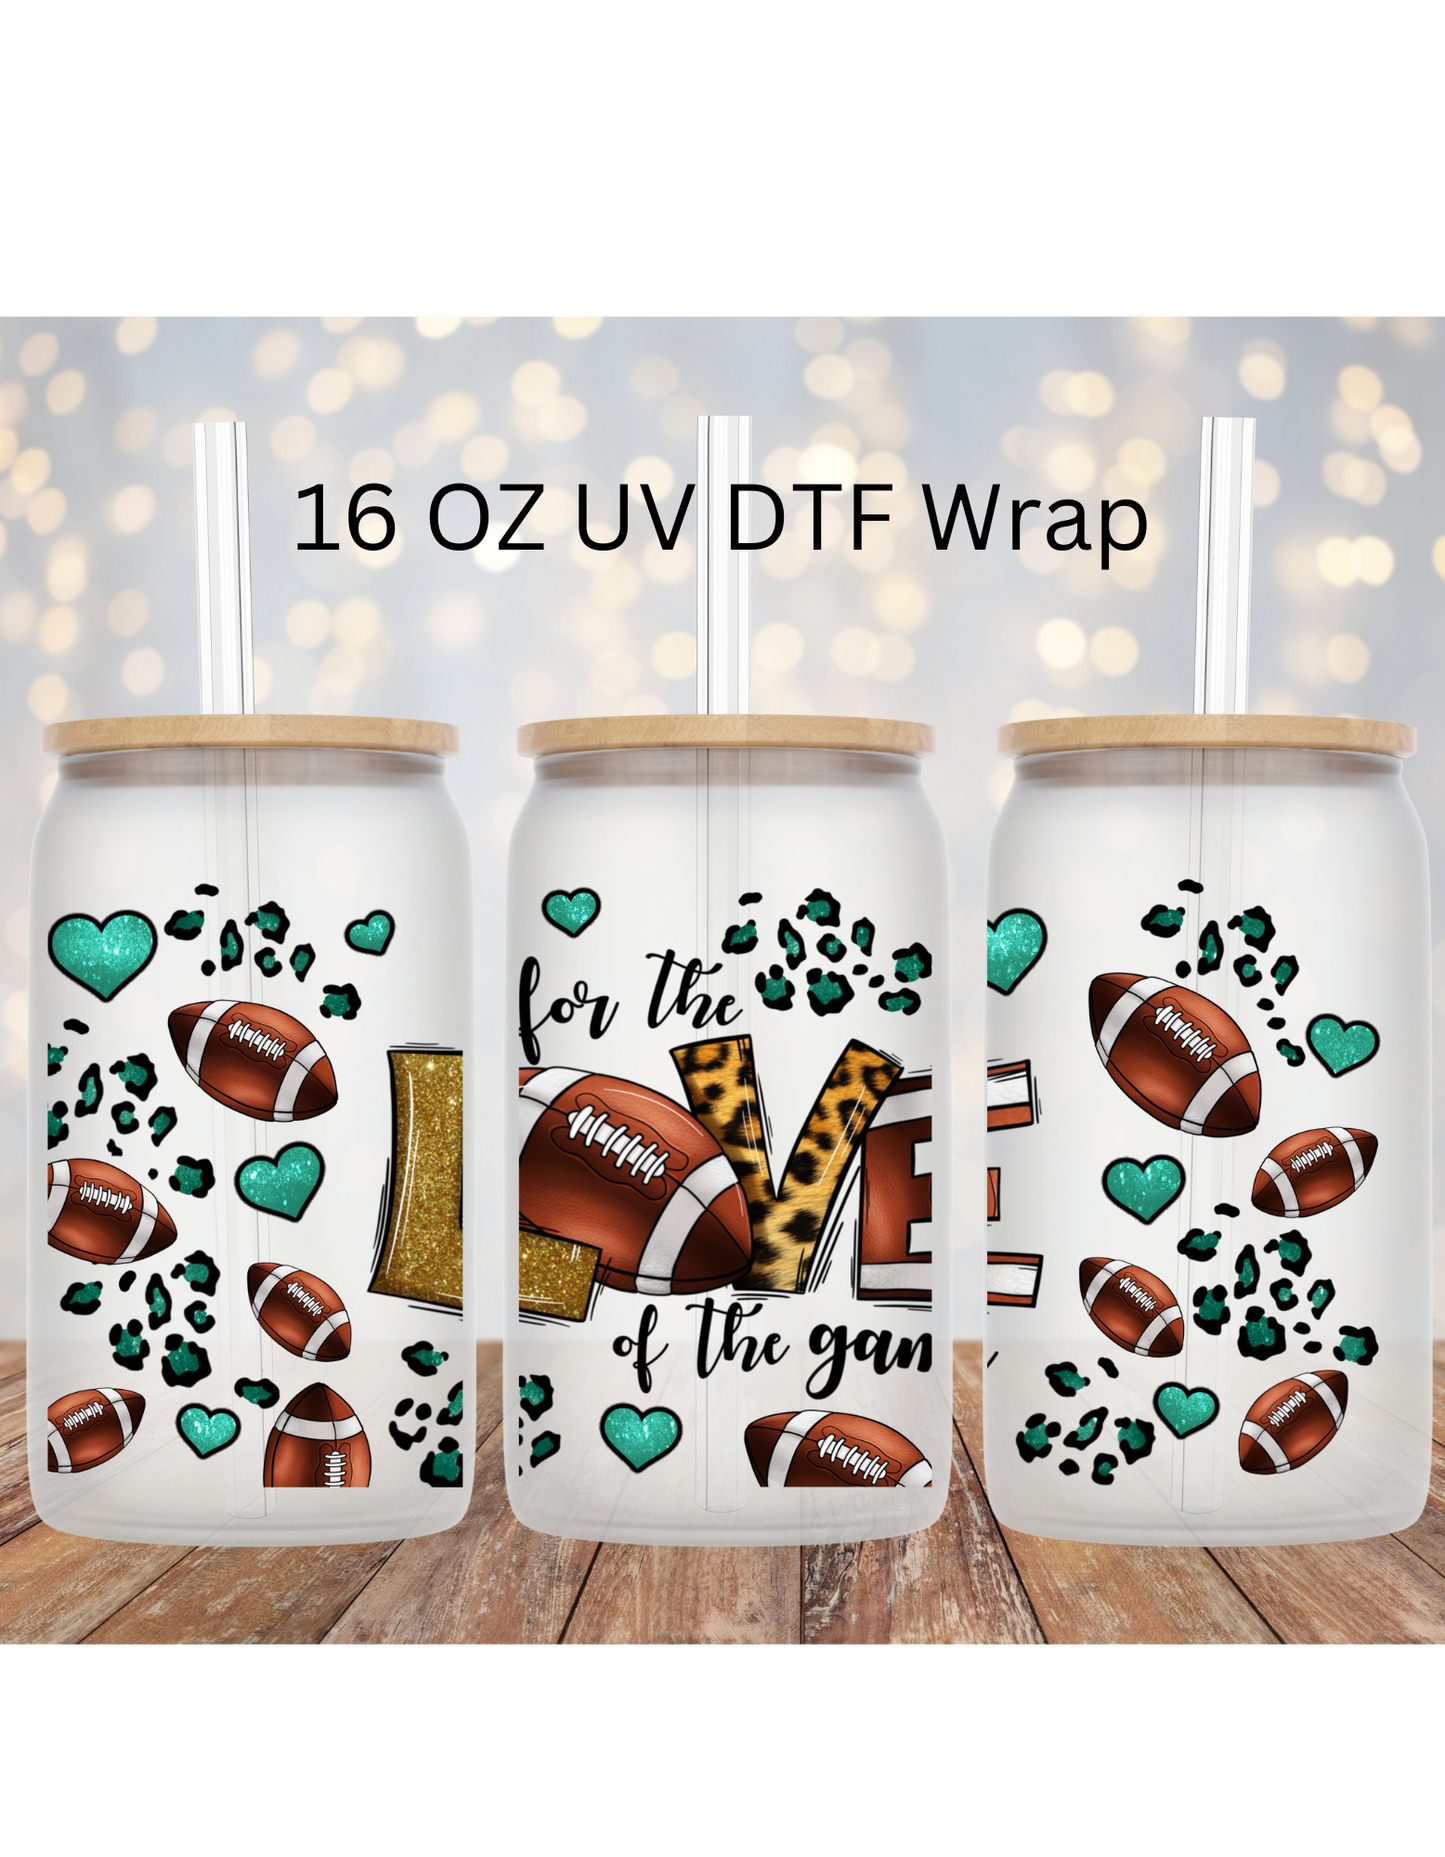 36 Under the SHE 16 oz UV DTF Cup Wrap – Geralyn's Gems & Gifts